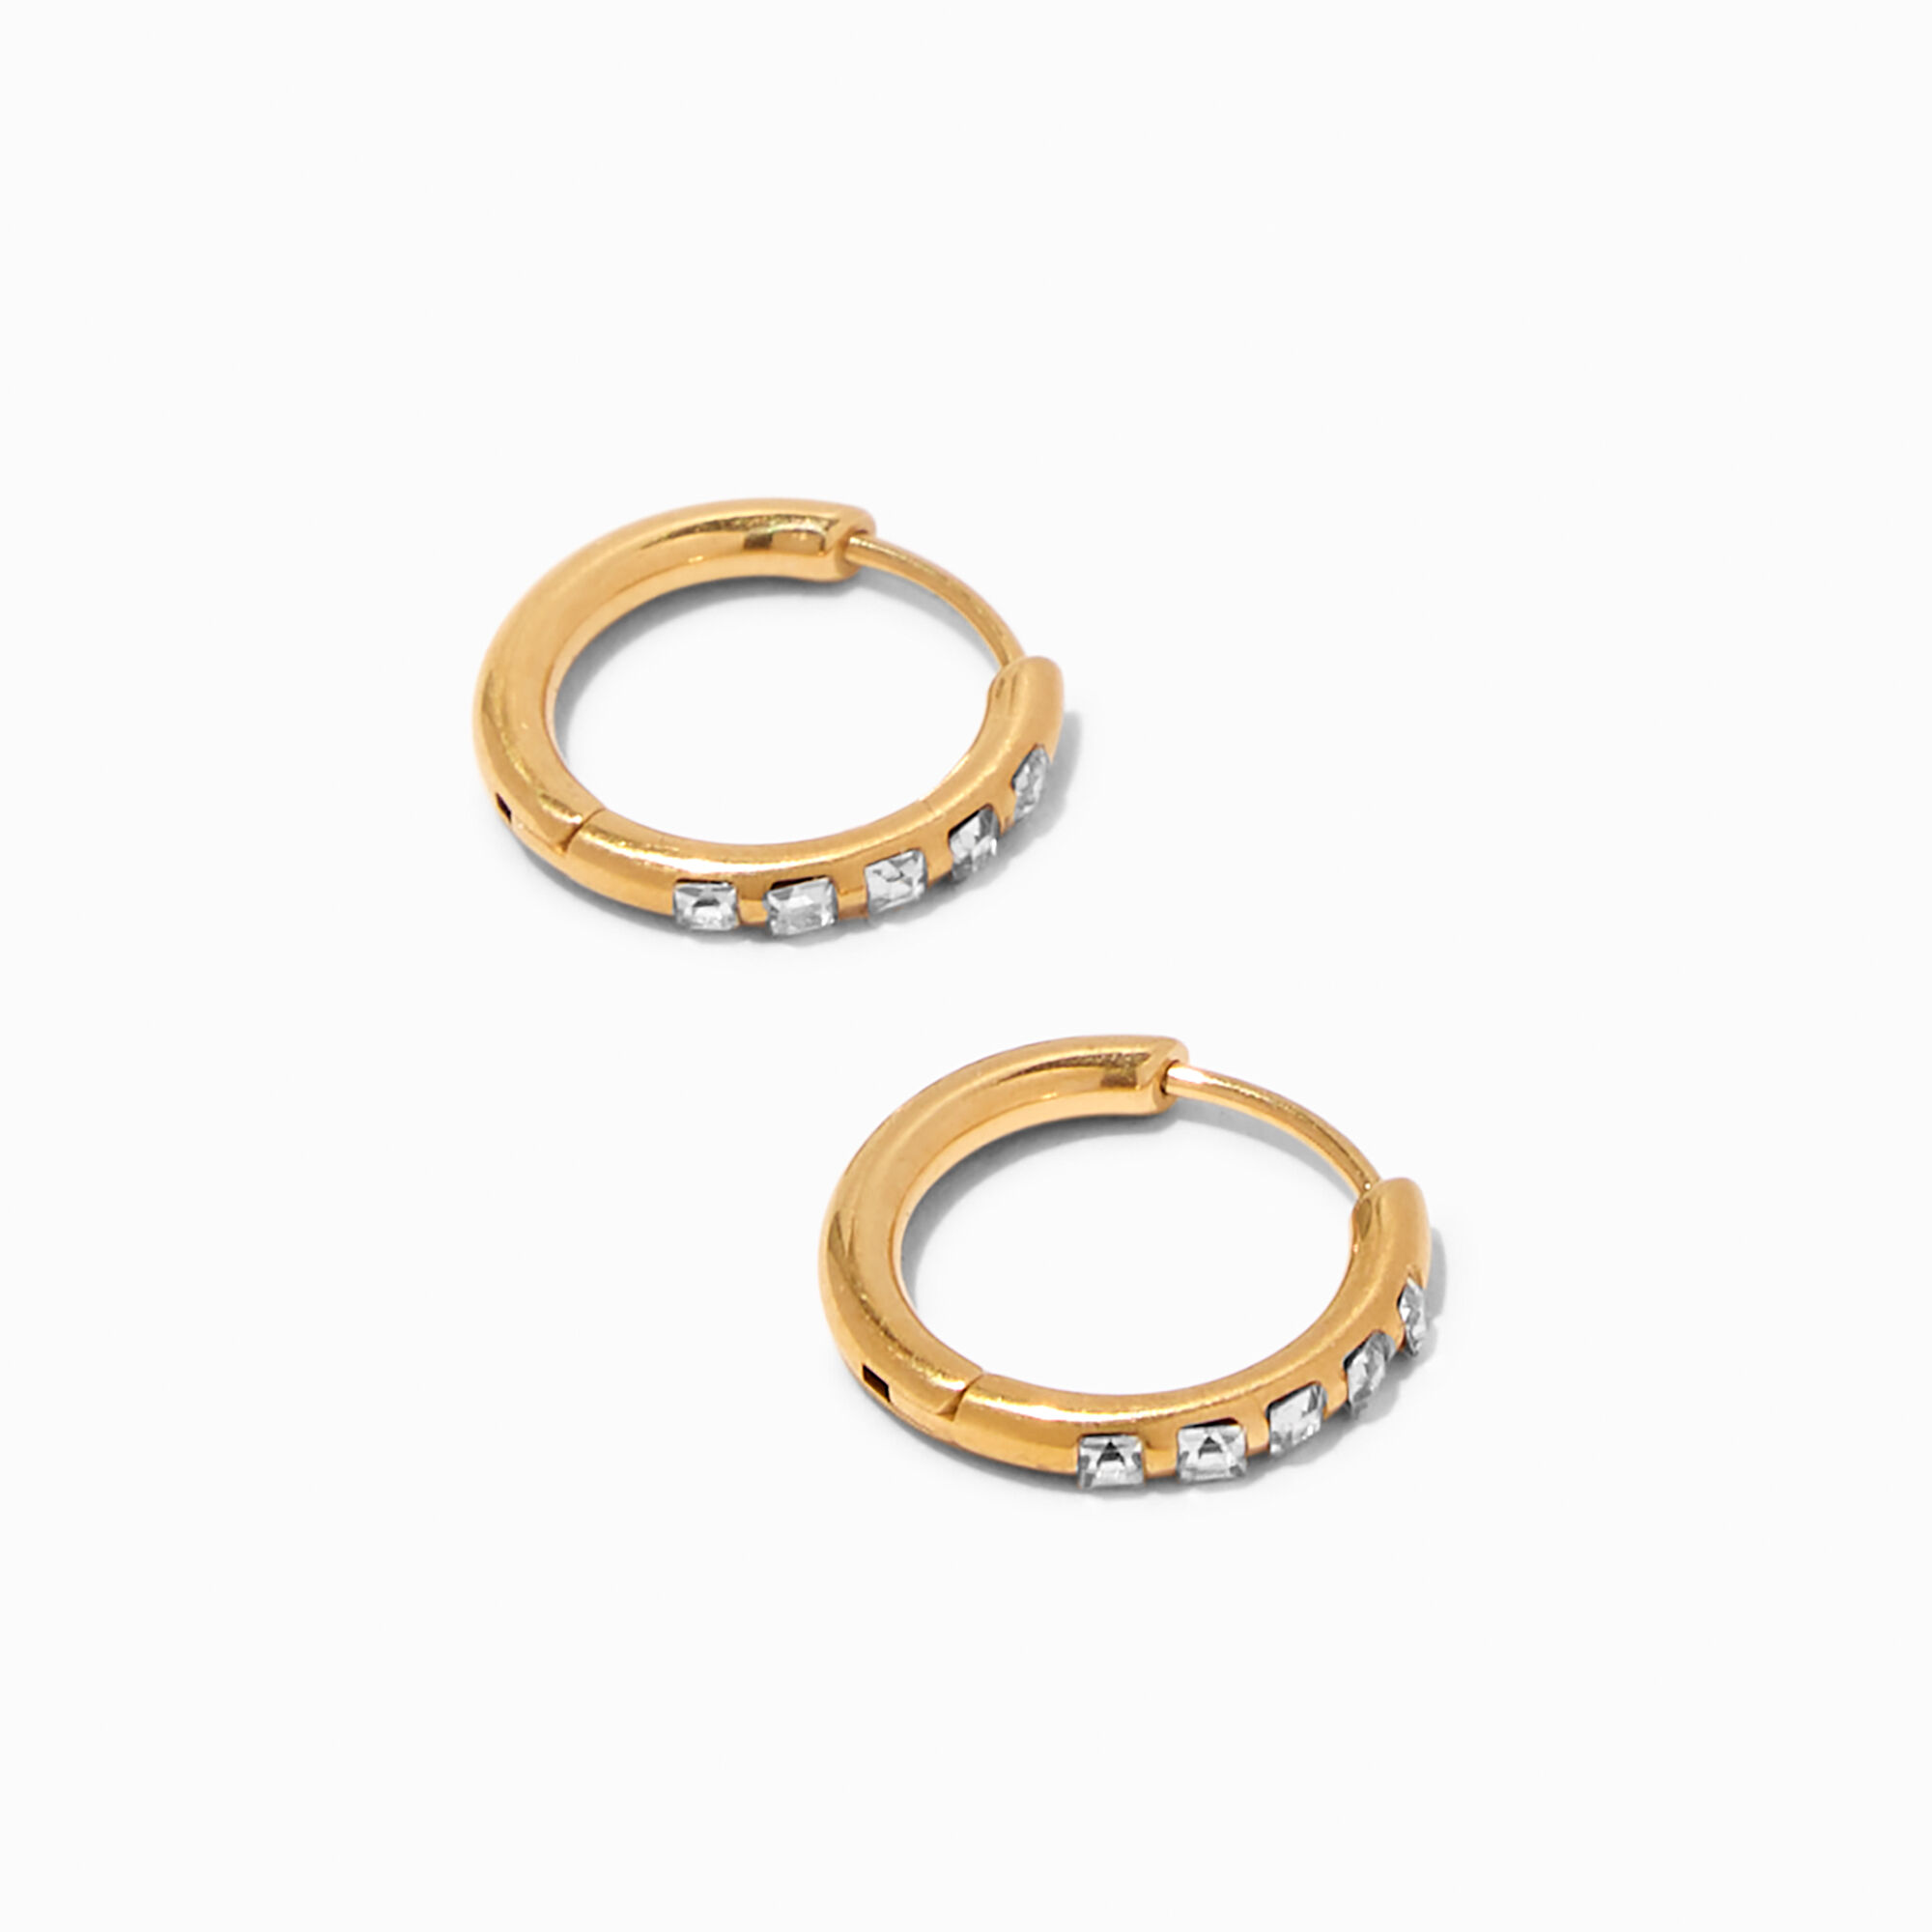 View C Luxe By Claires Titanium 10MM Crystal Huggie Hoop Earrings Gold information